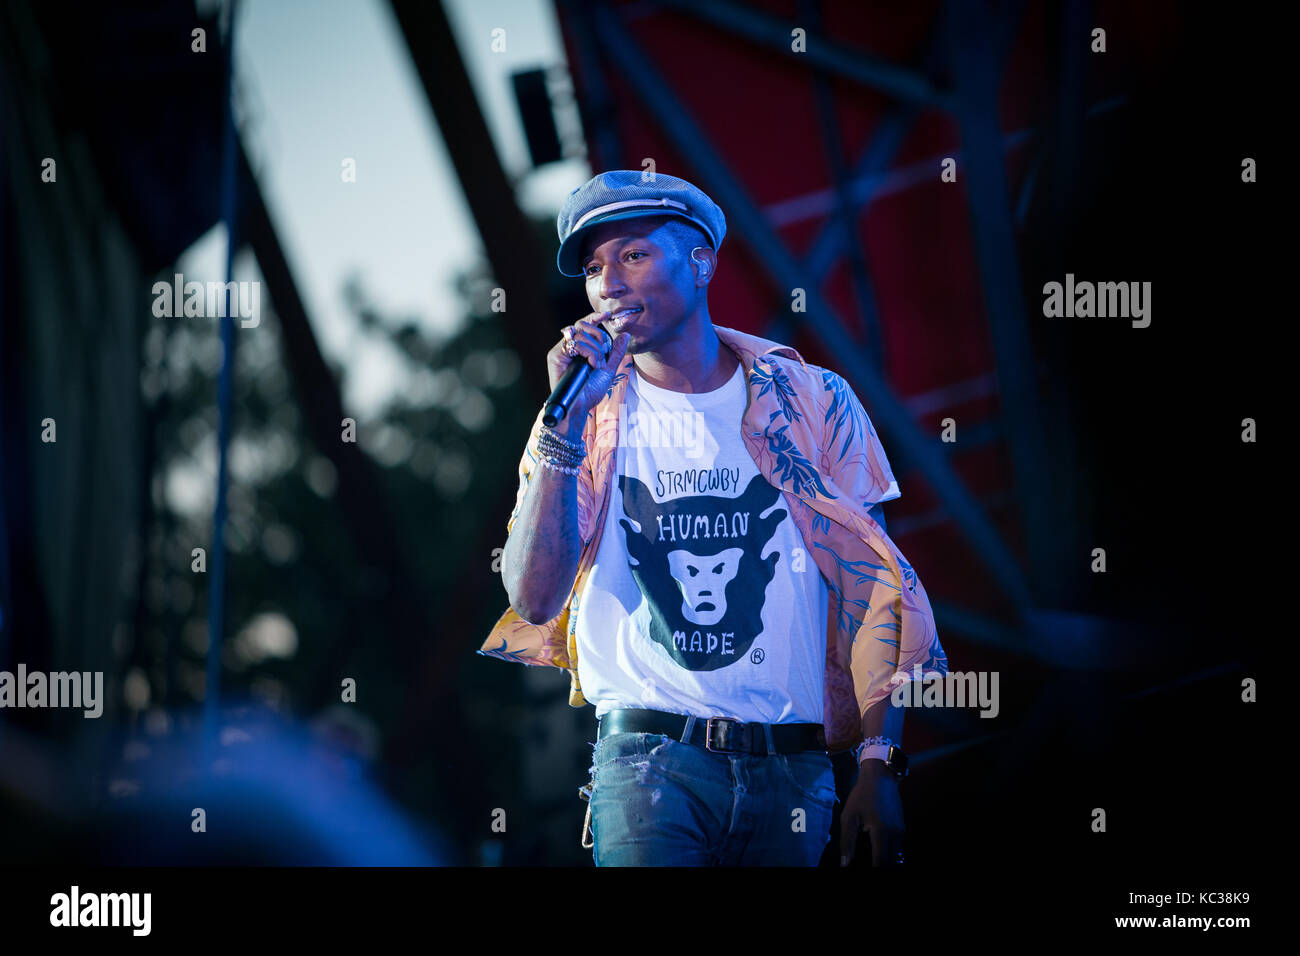 Pharrell Williams, the American singer, rapper and records producer performs a live concert at the Orange Stage at the Danish music festival Roskilde Festival 2015. Pharrell Williams is also known from the producer duo The Neptunes and the band N*E*R*D. Denmark, 01/07 2015. Stock Photo